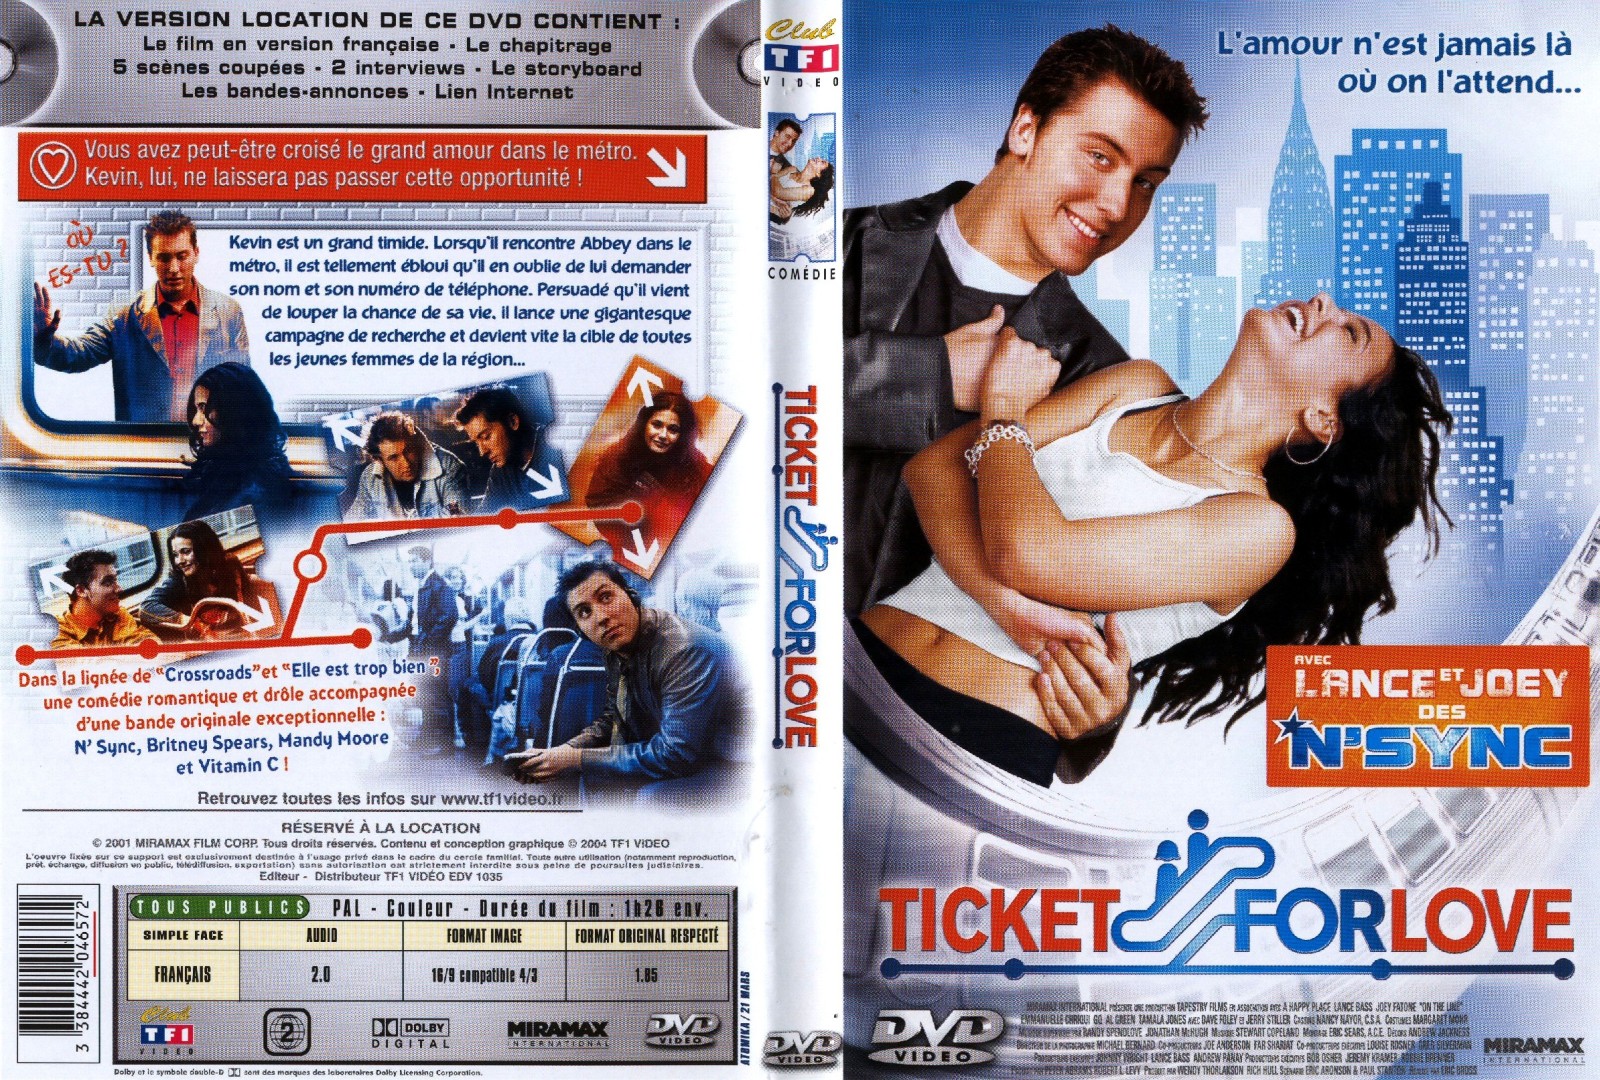 Jaquette DVD Ticket for love